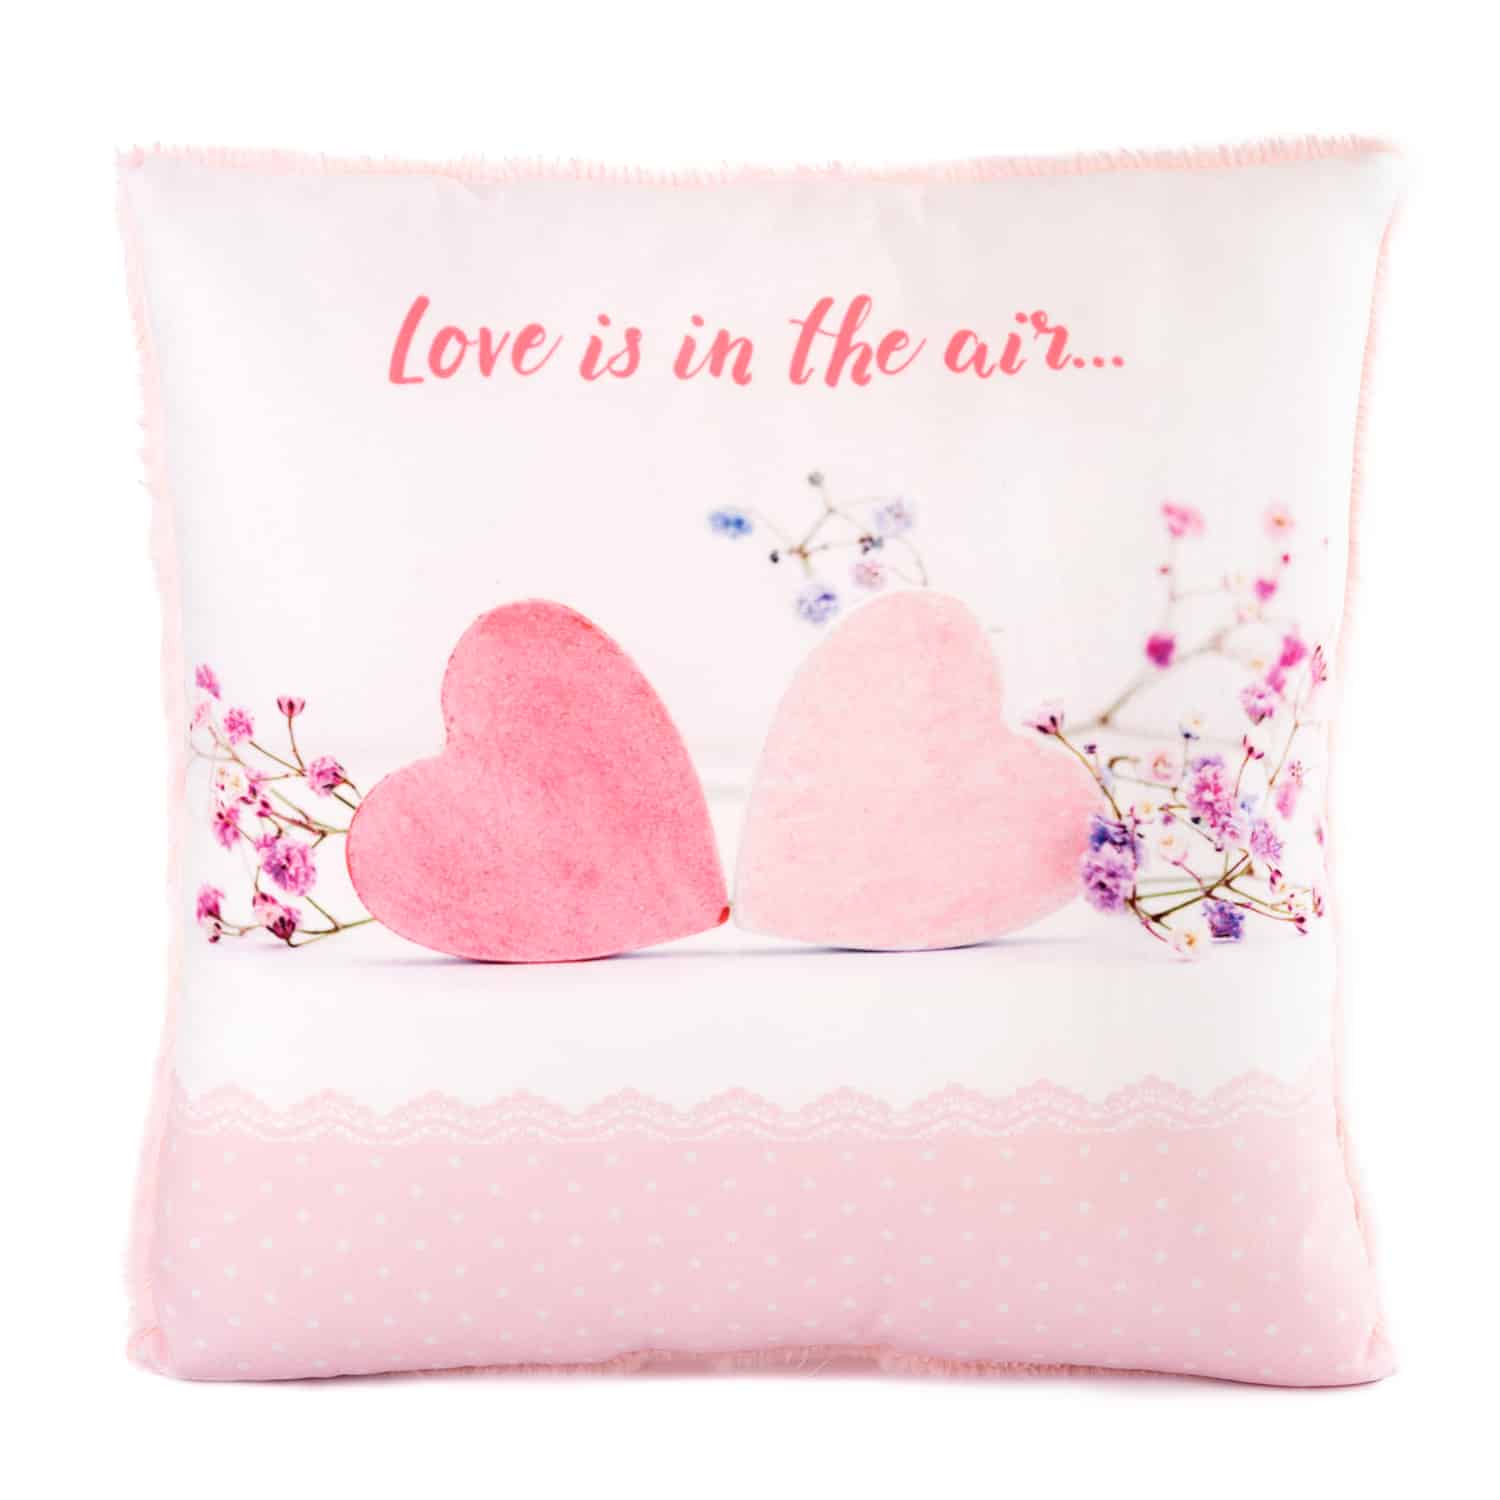 Plush pillow for Valentine's Day